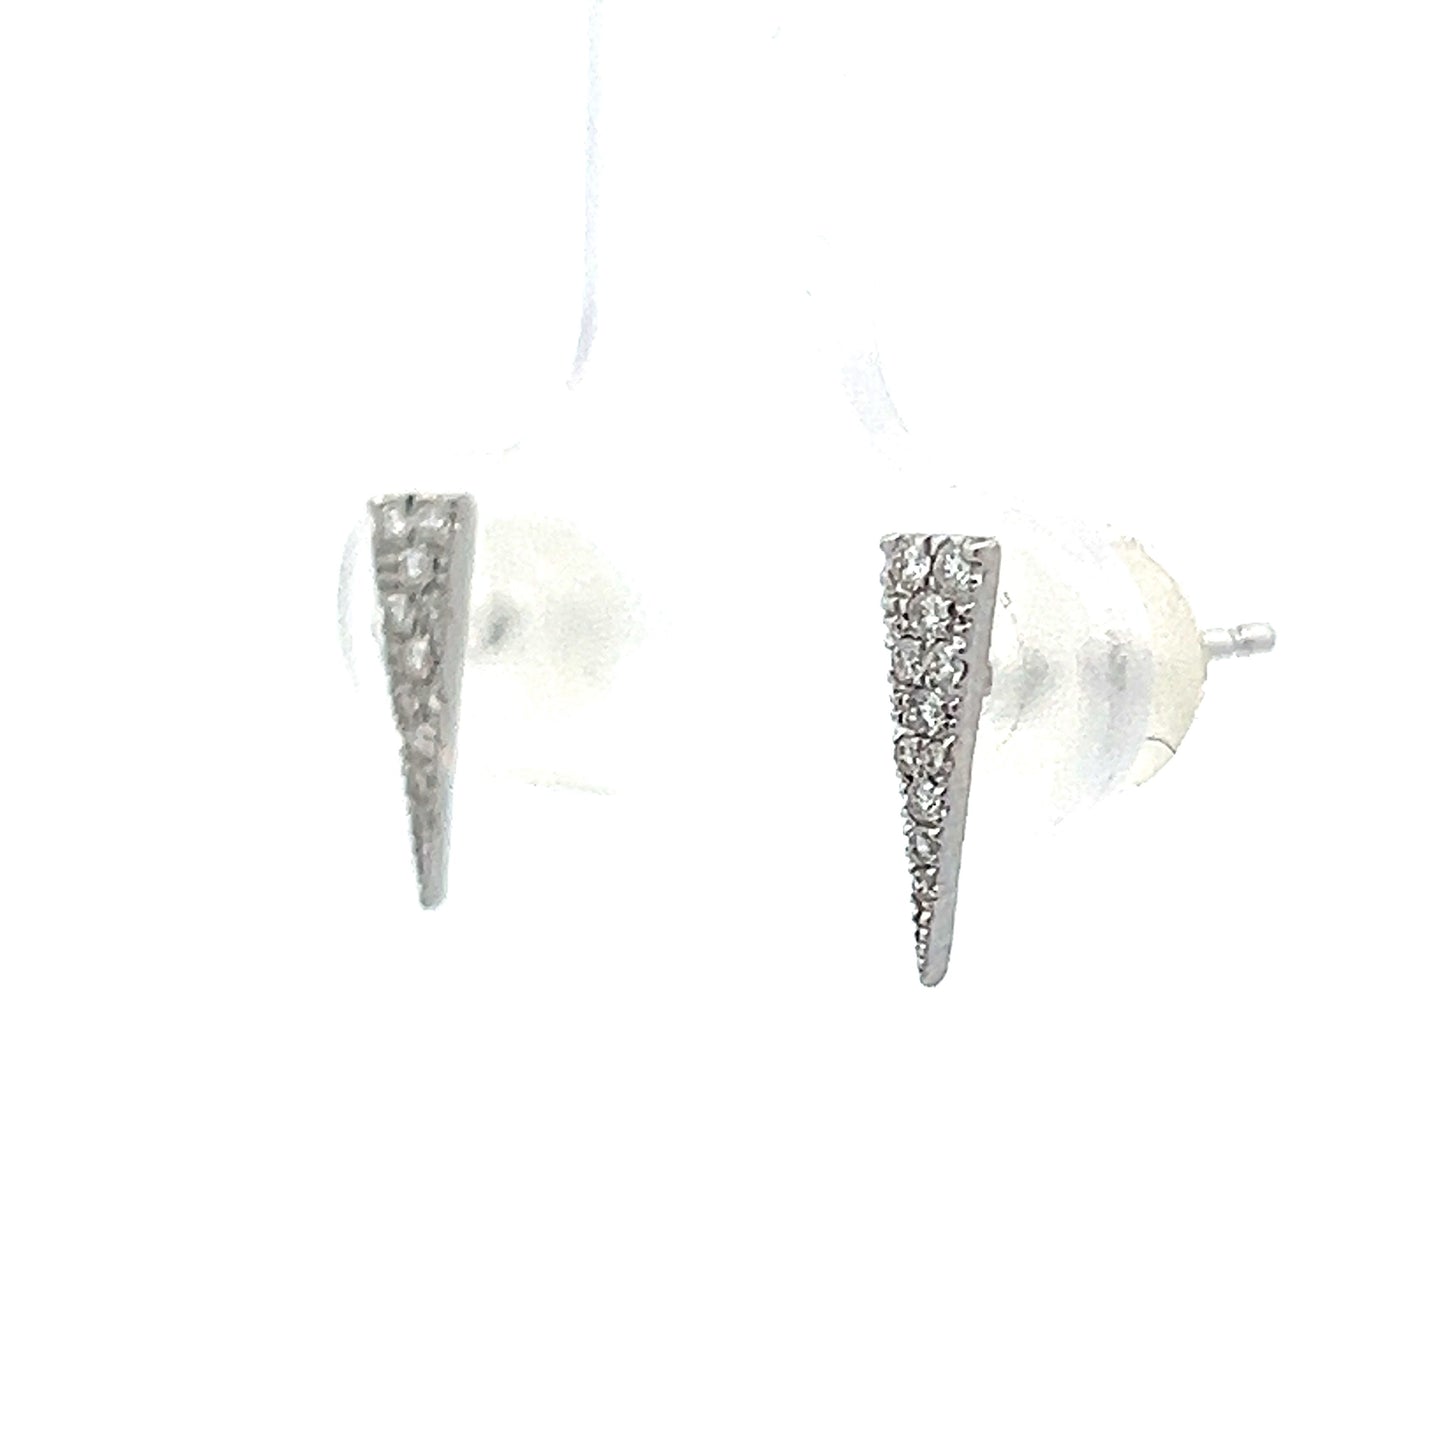 Pave Diamond Triangle Stud Earrings in 14k White Gold